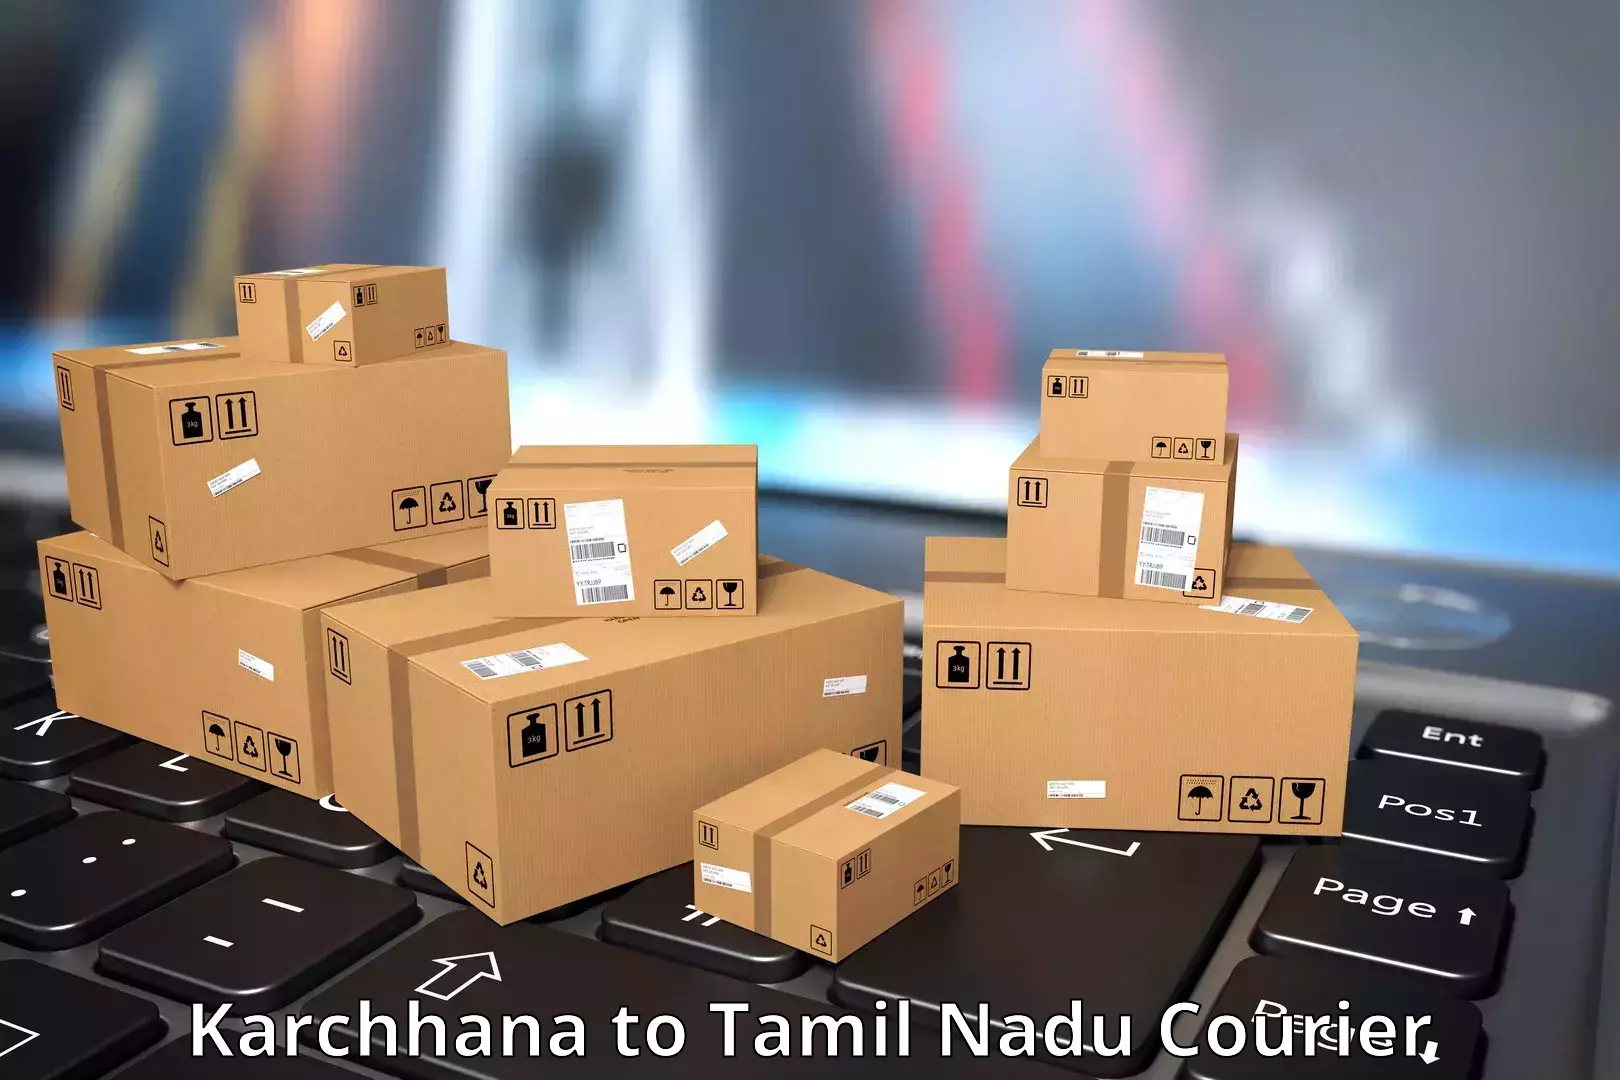 Sustainable courier practices Karchhana to Tamil Nadu Agricultural University Coimbatore